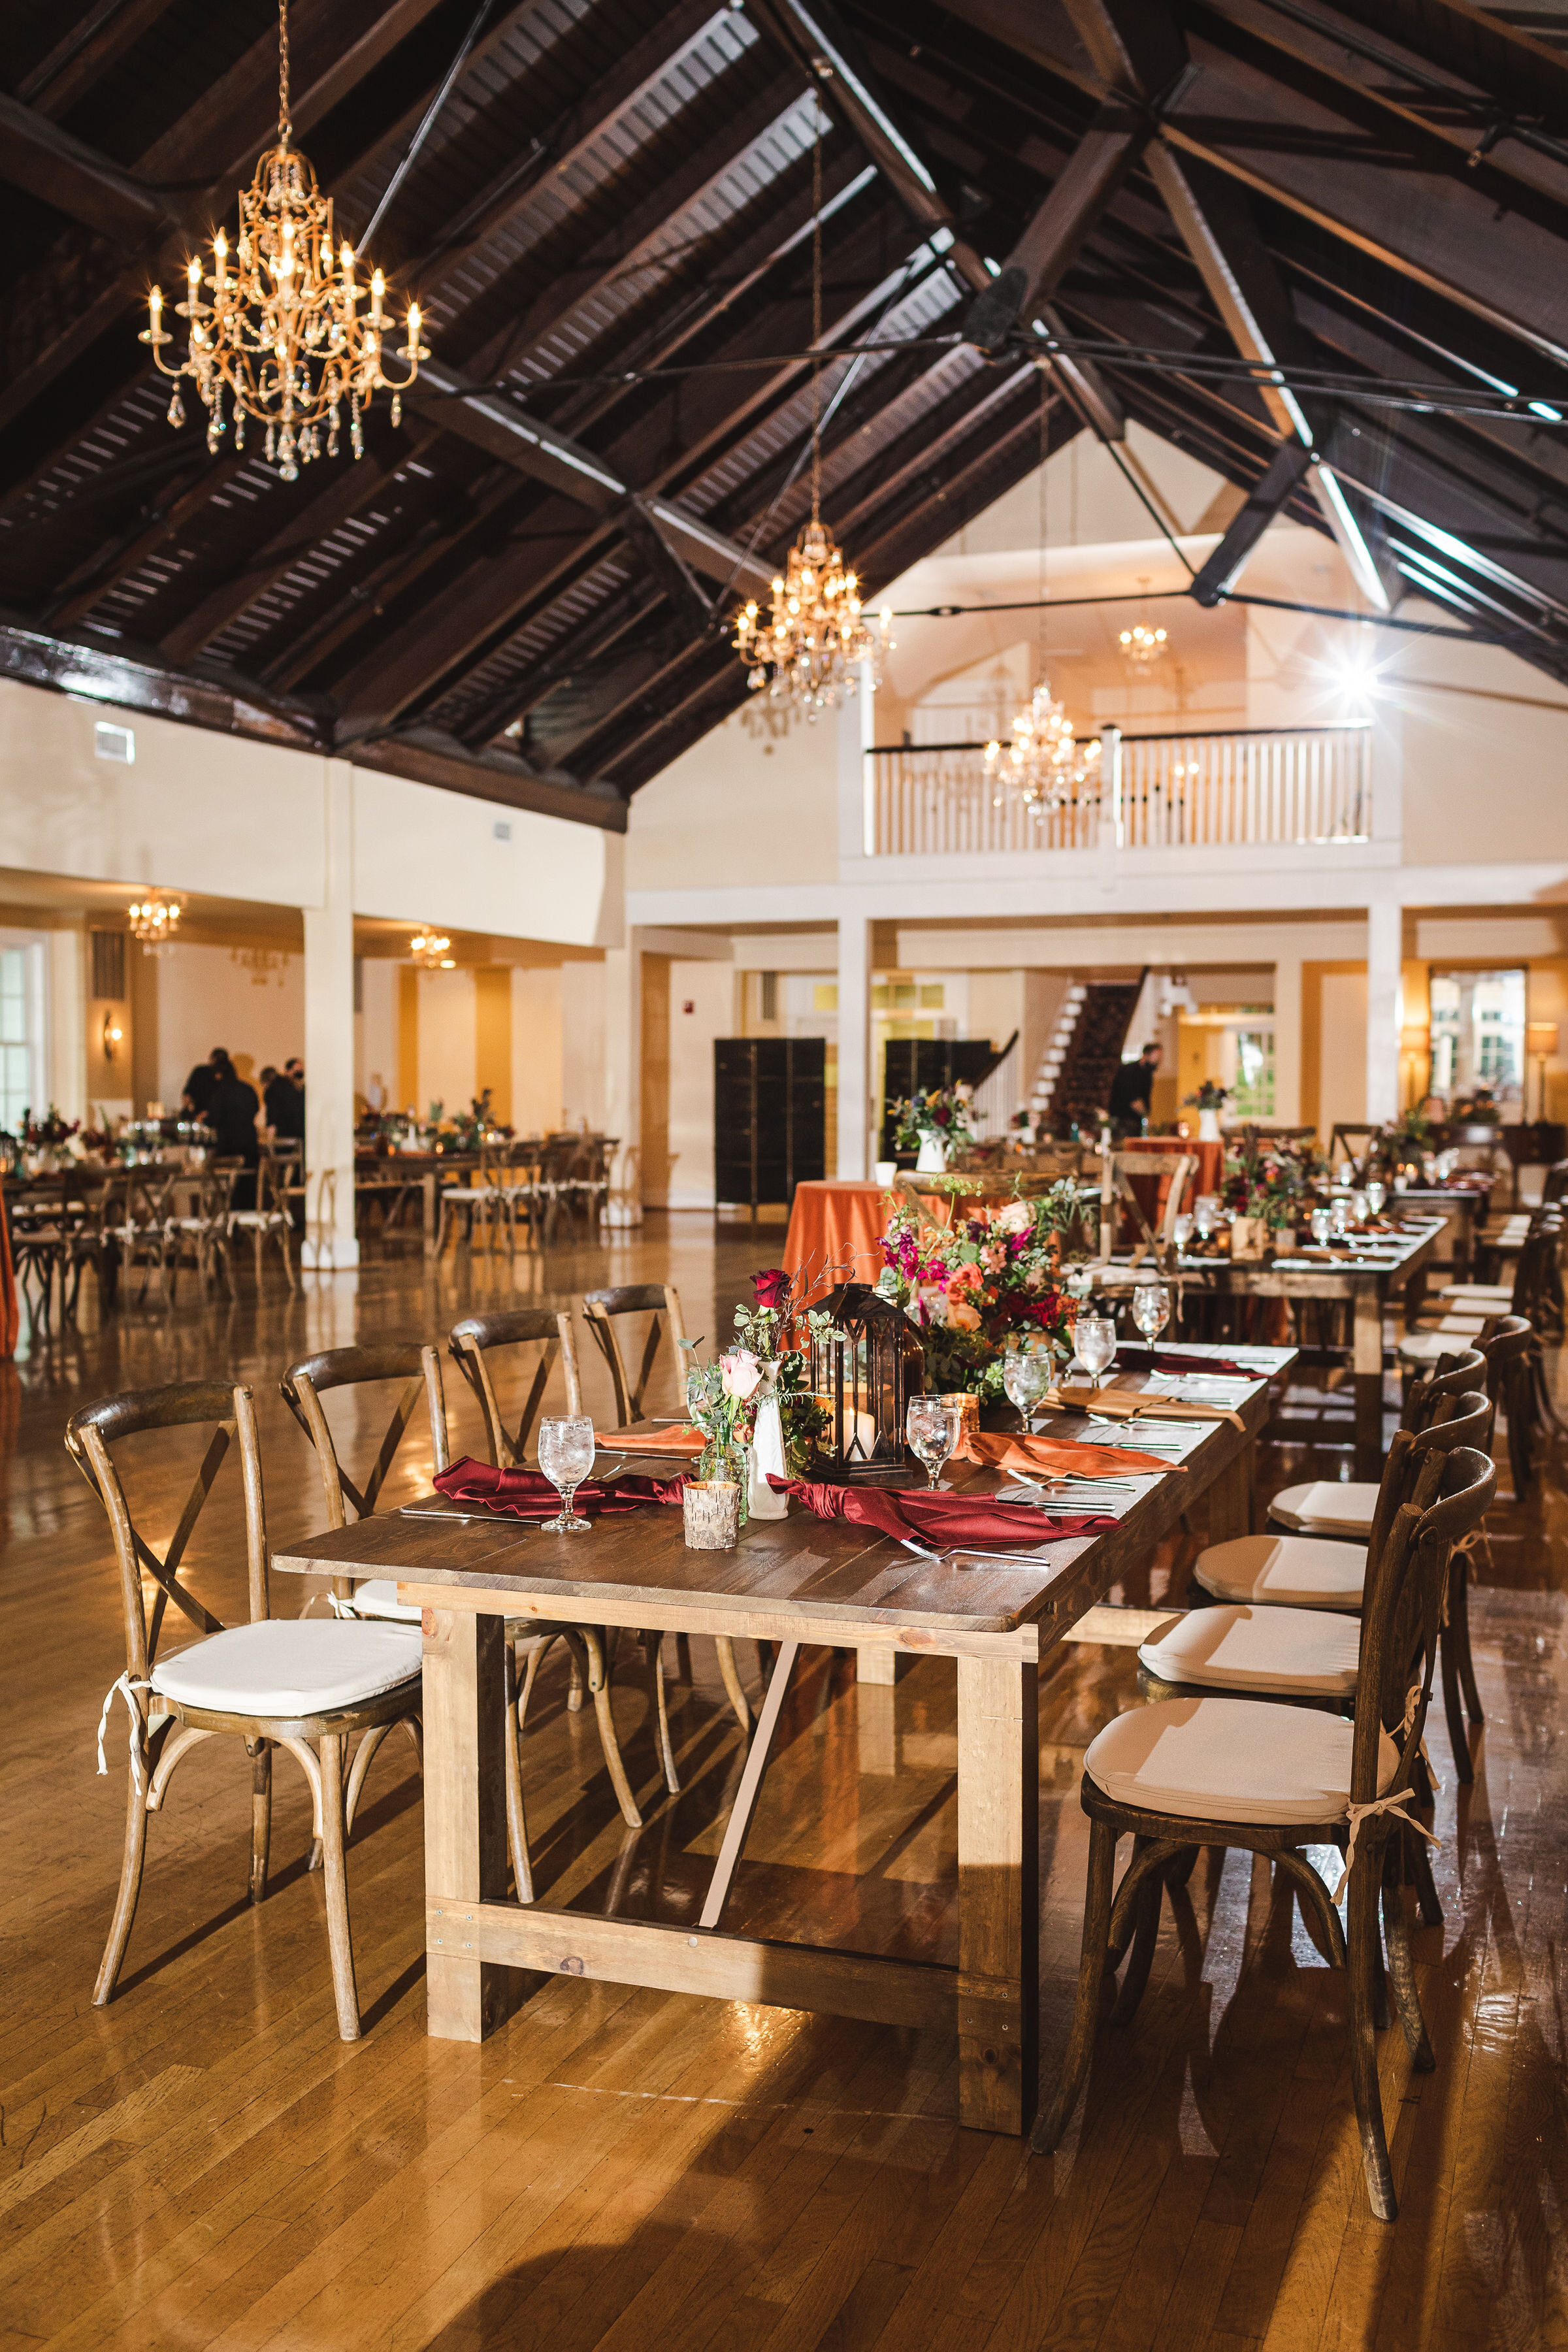 suffolk virginia wedding reception room with wood vaulted ceiling